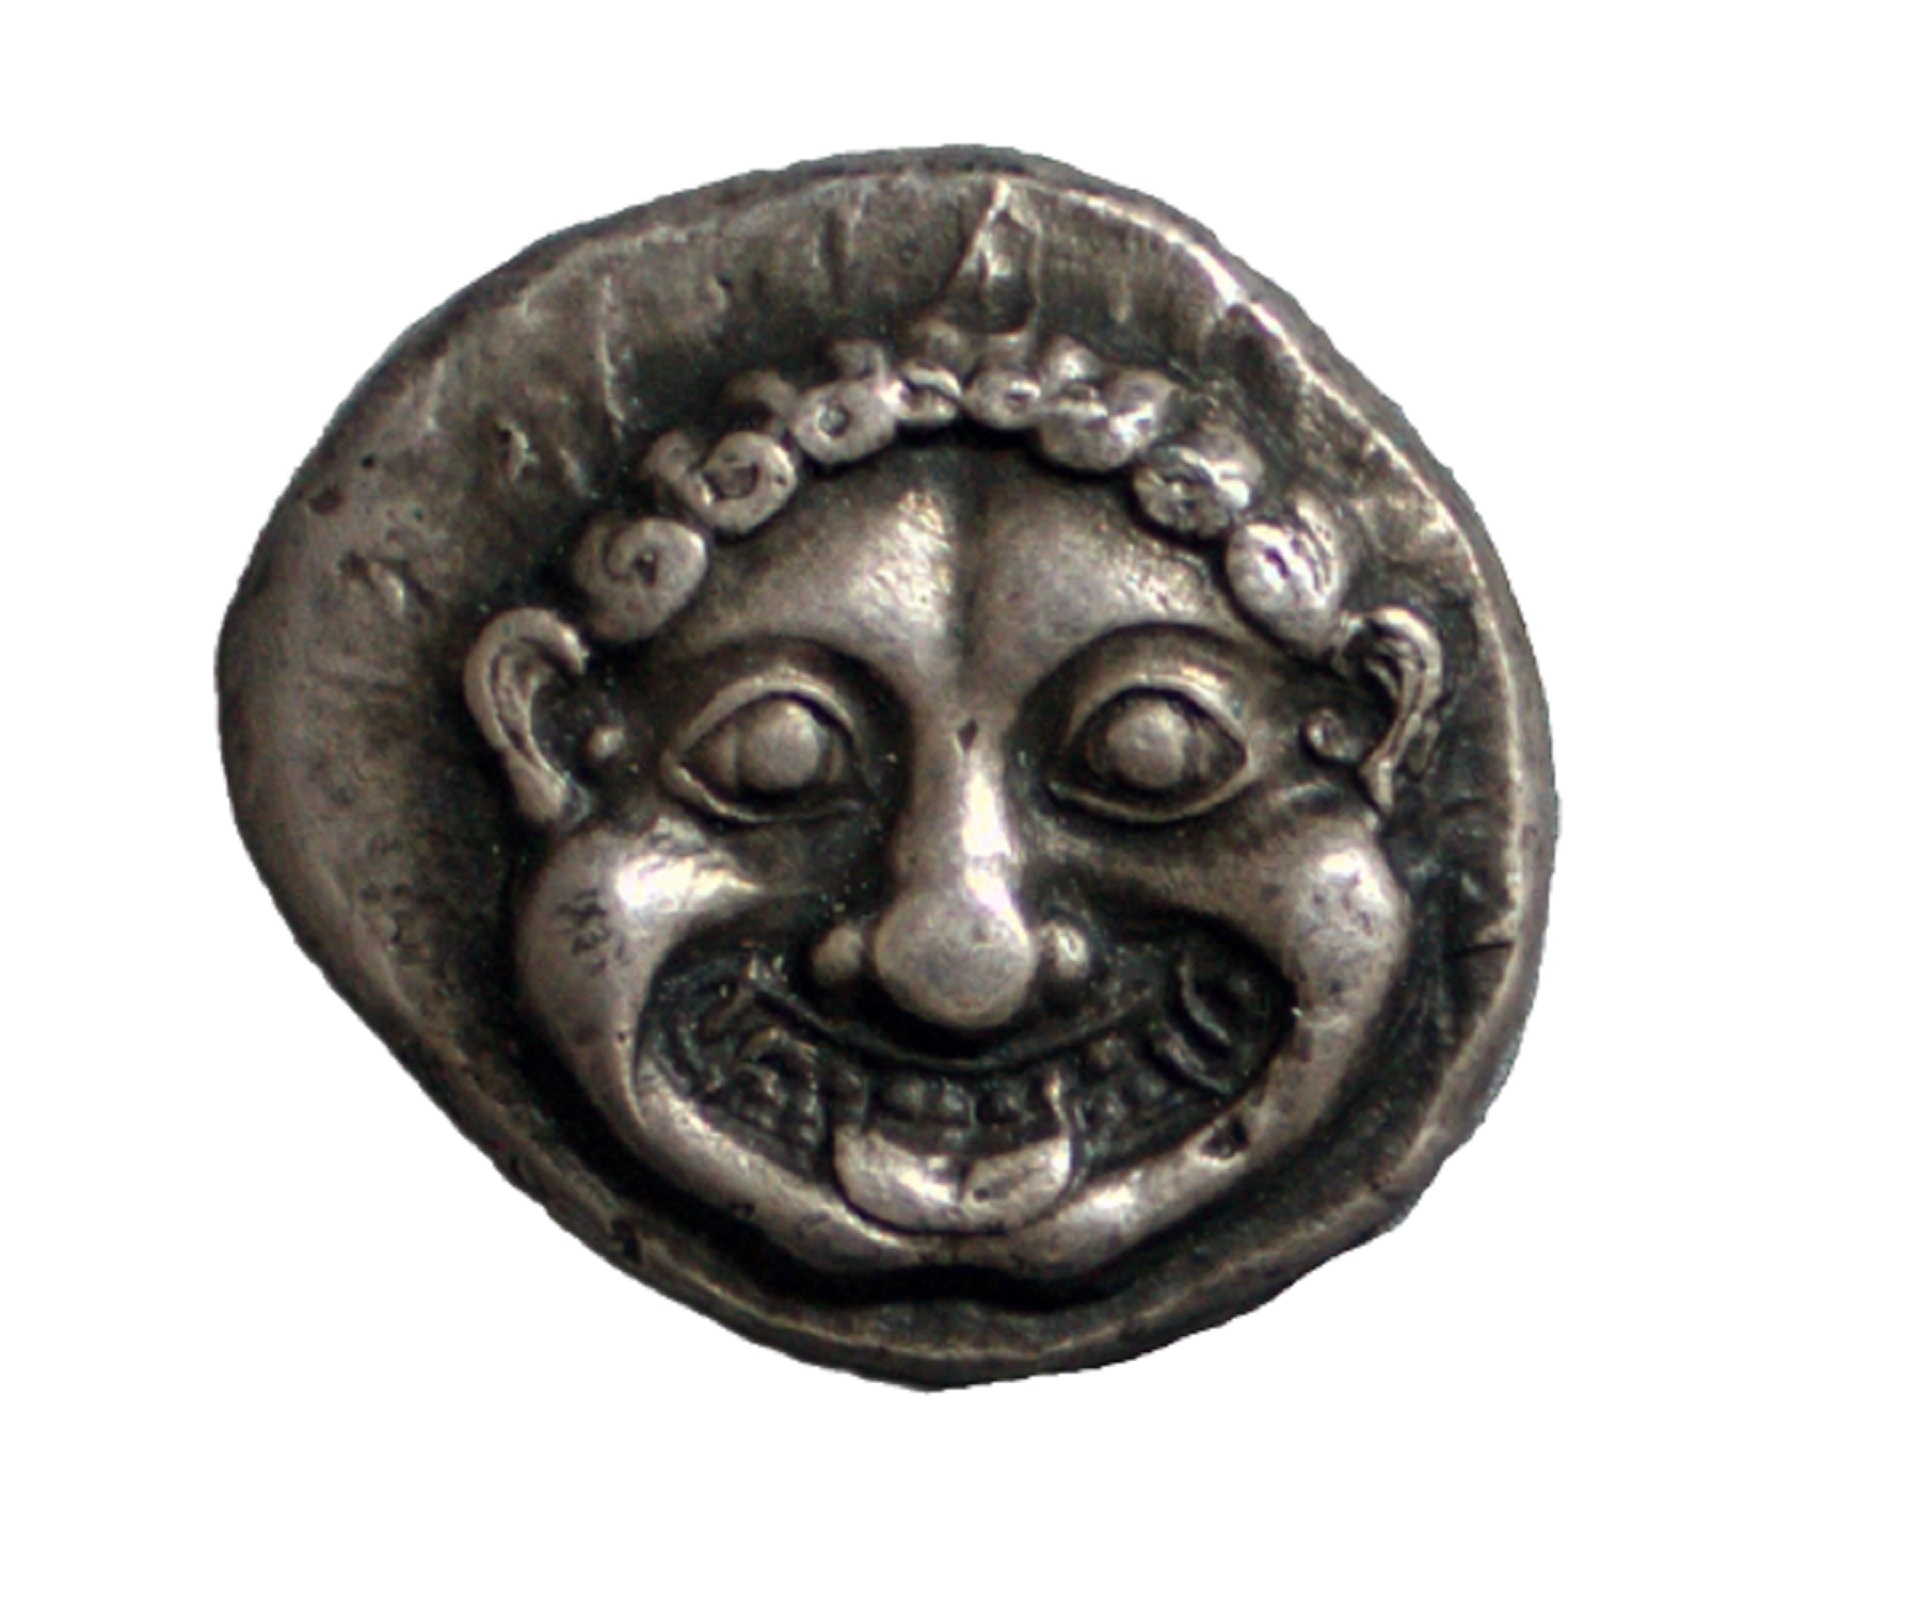 A 19th-century electrotype copy of an Ancient Greek coin depicting a Gorgon. A non-circular coin on white background showing a Gorgon.